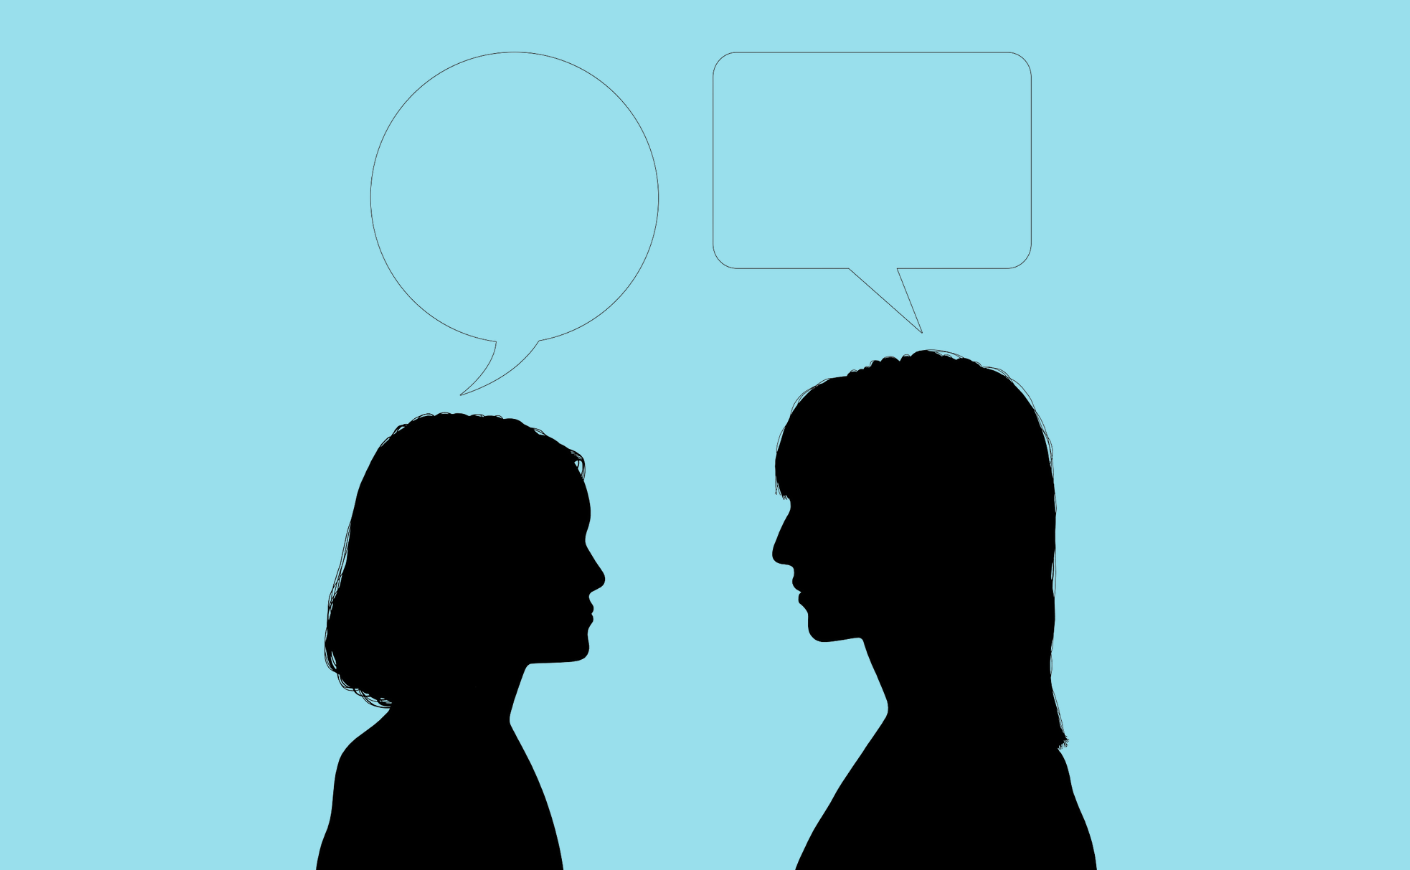 mother and child talking to each other in silhouette